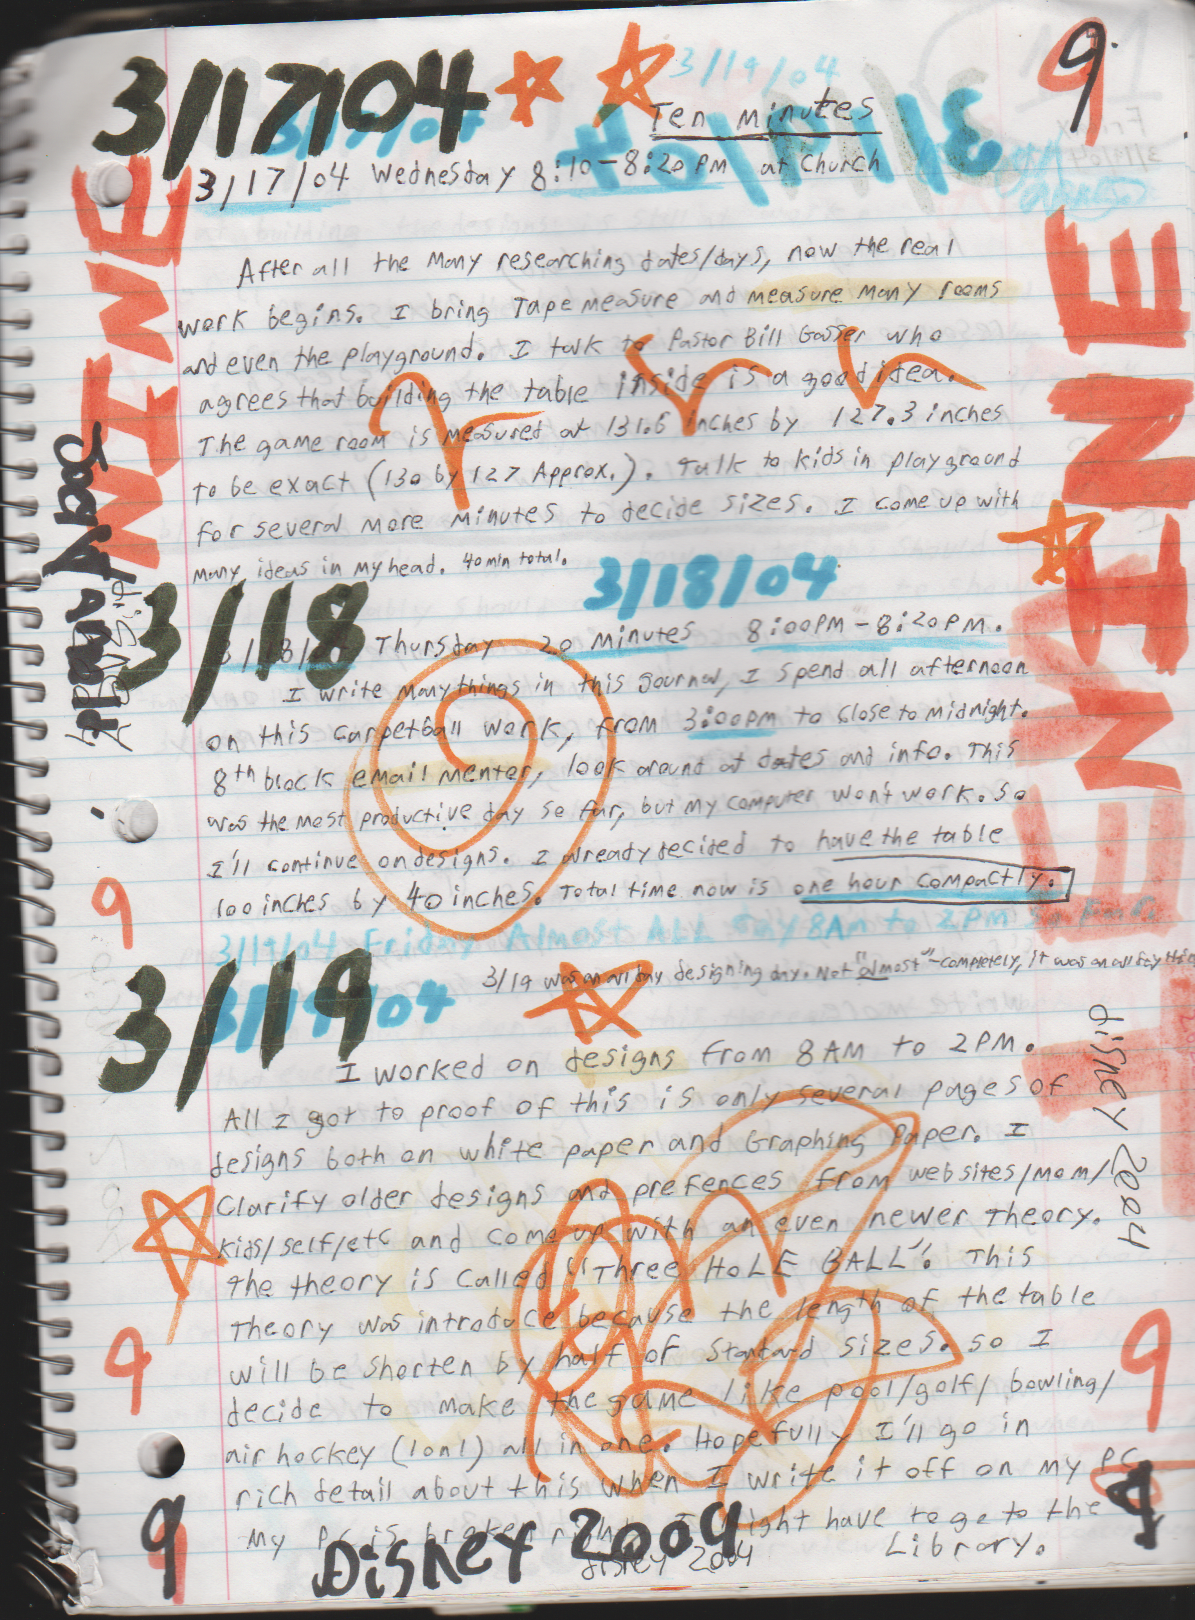 2004-01-29 - Thursday - Carpetball FGHS Senior Project Journal, Joey Arnold, Part 02, 96pages numbered, Notebook-04.png